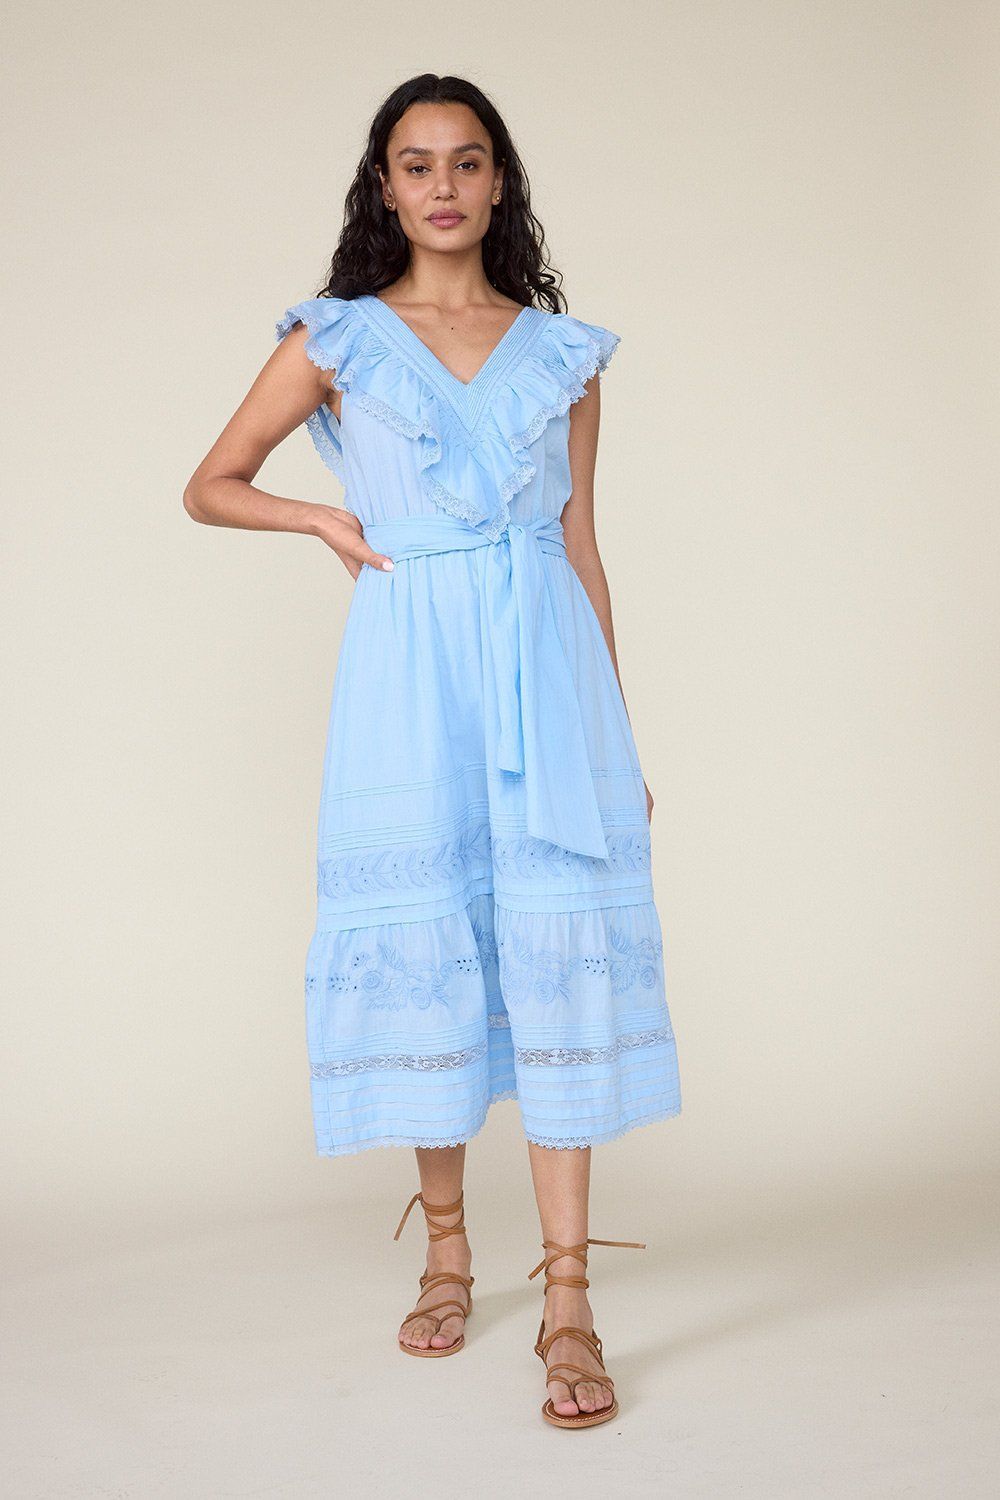 19 Stylish Summer Dresses 2021 - Pretty Dresses to Wear This Summer